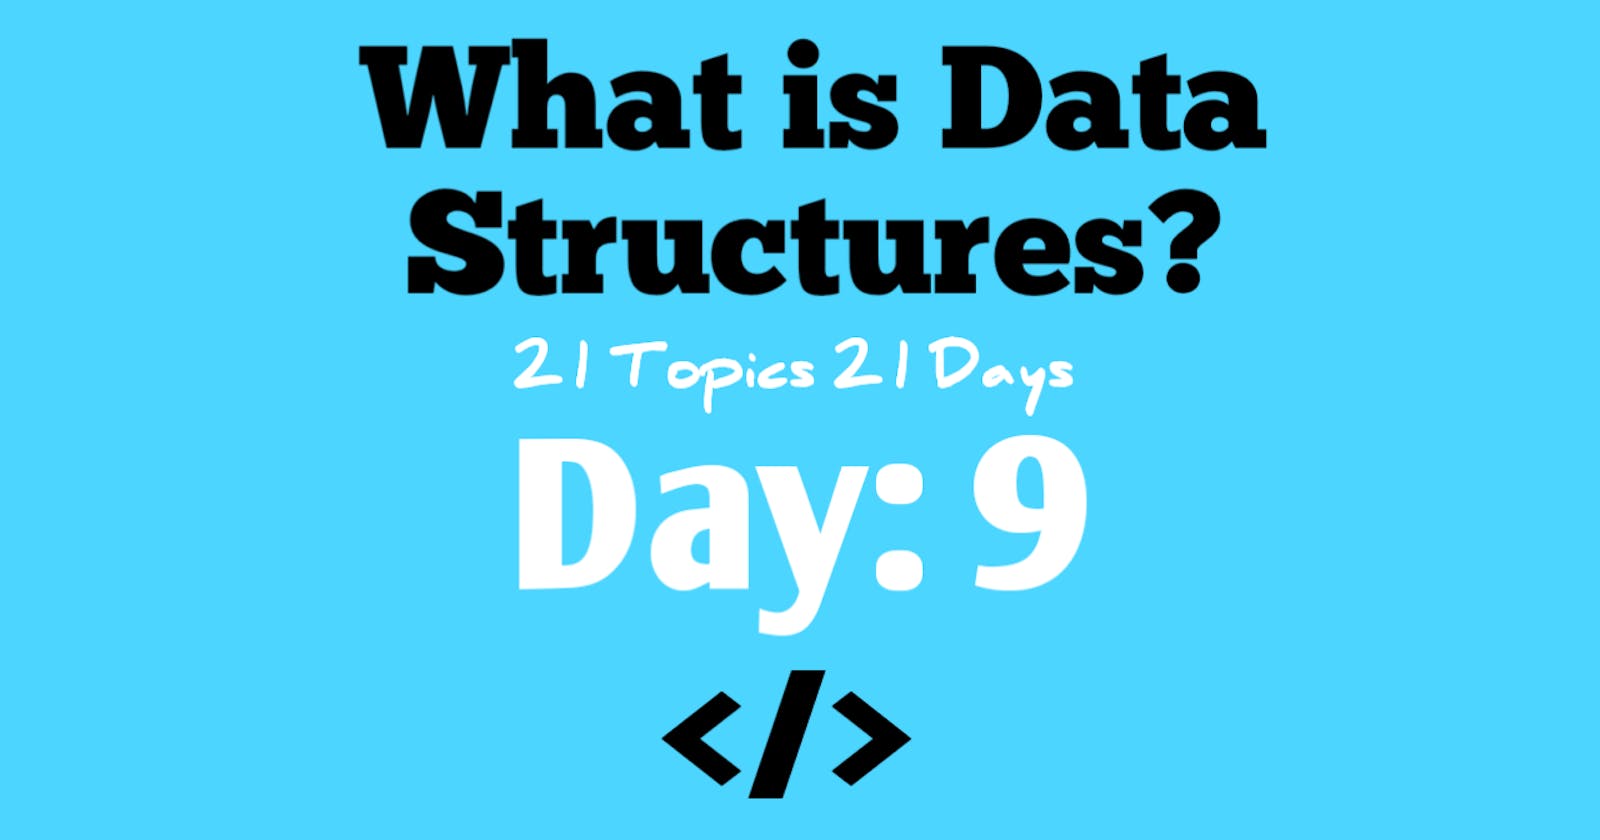 What is Data Structures